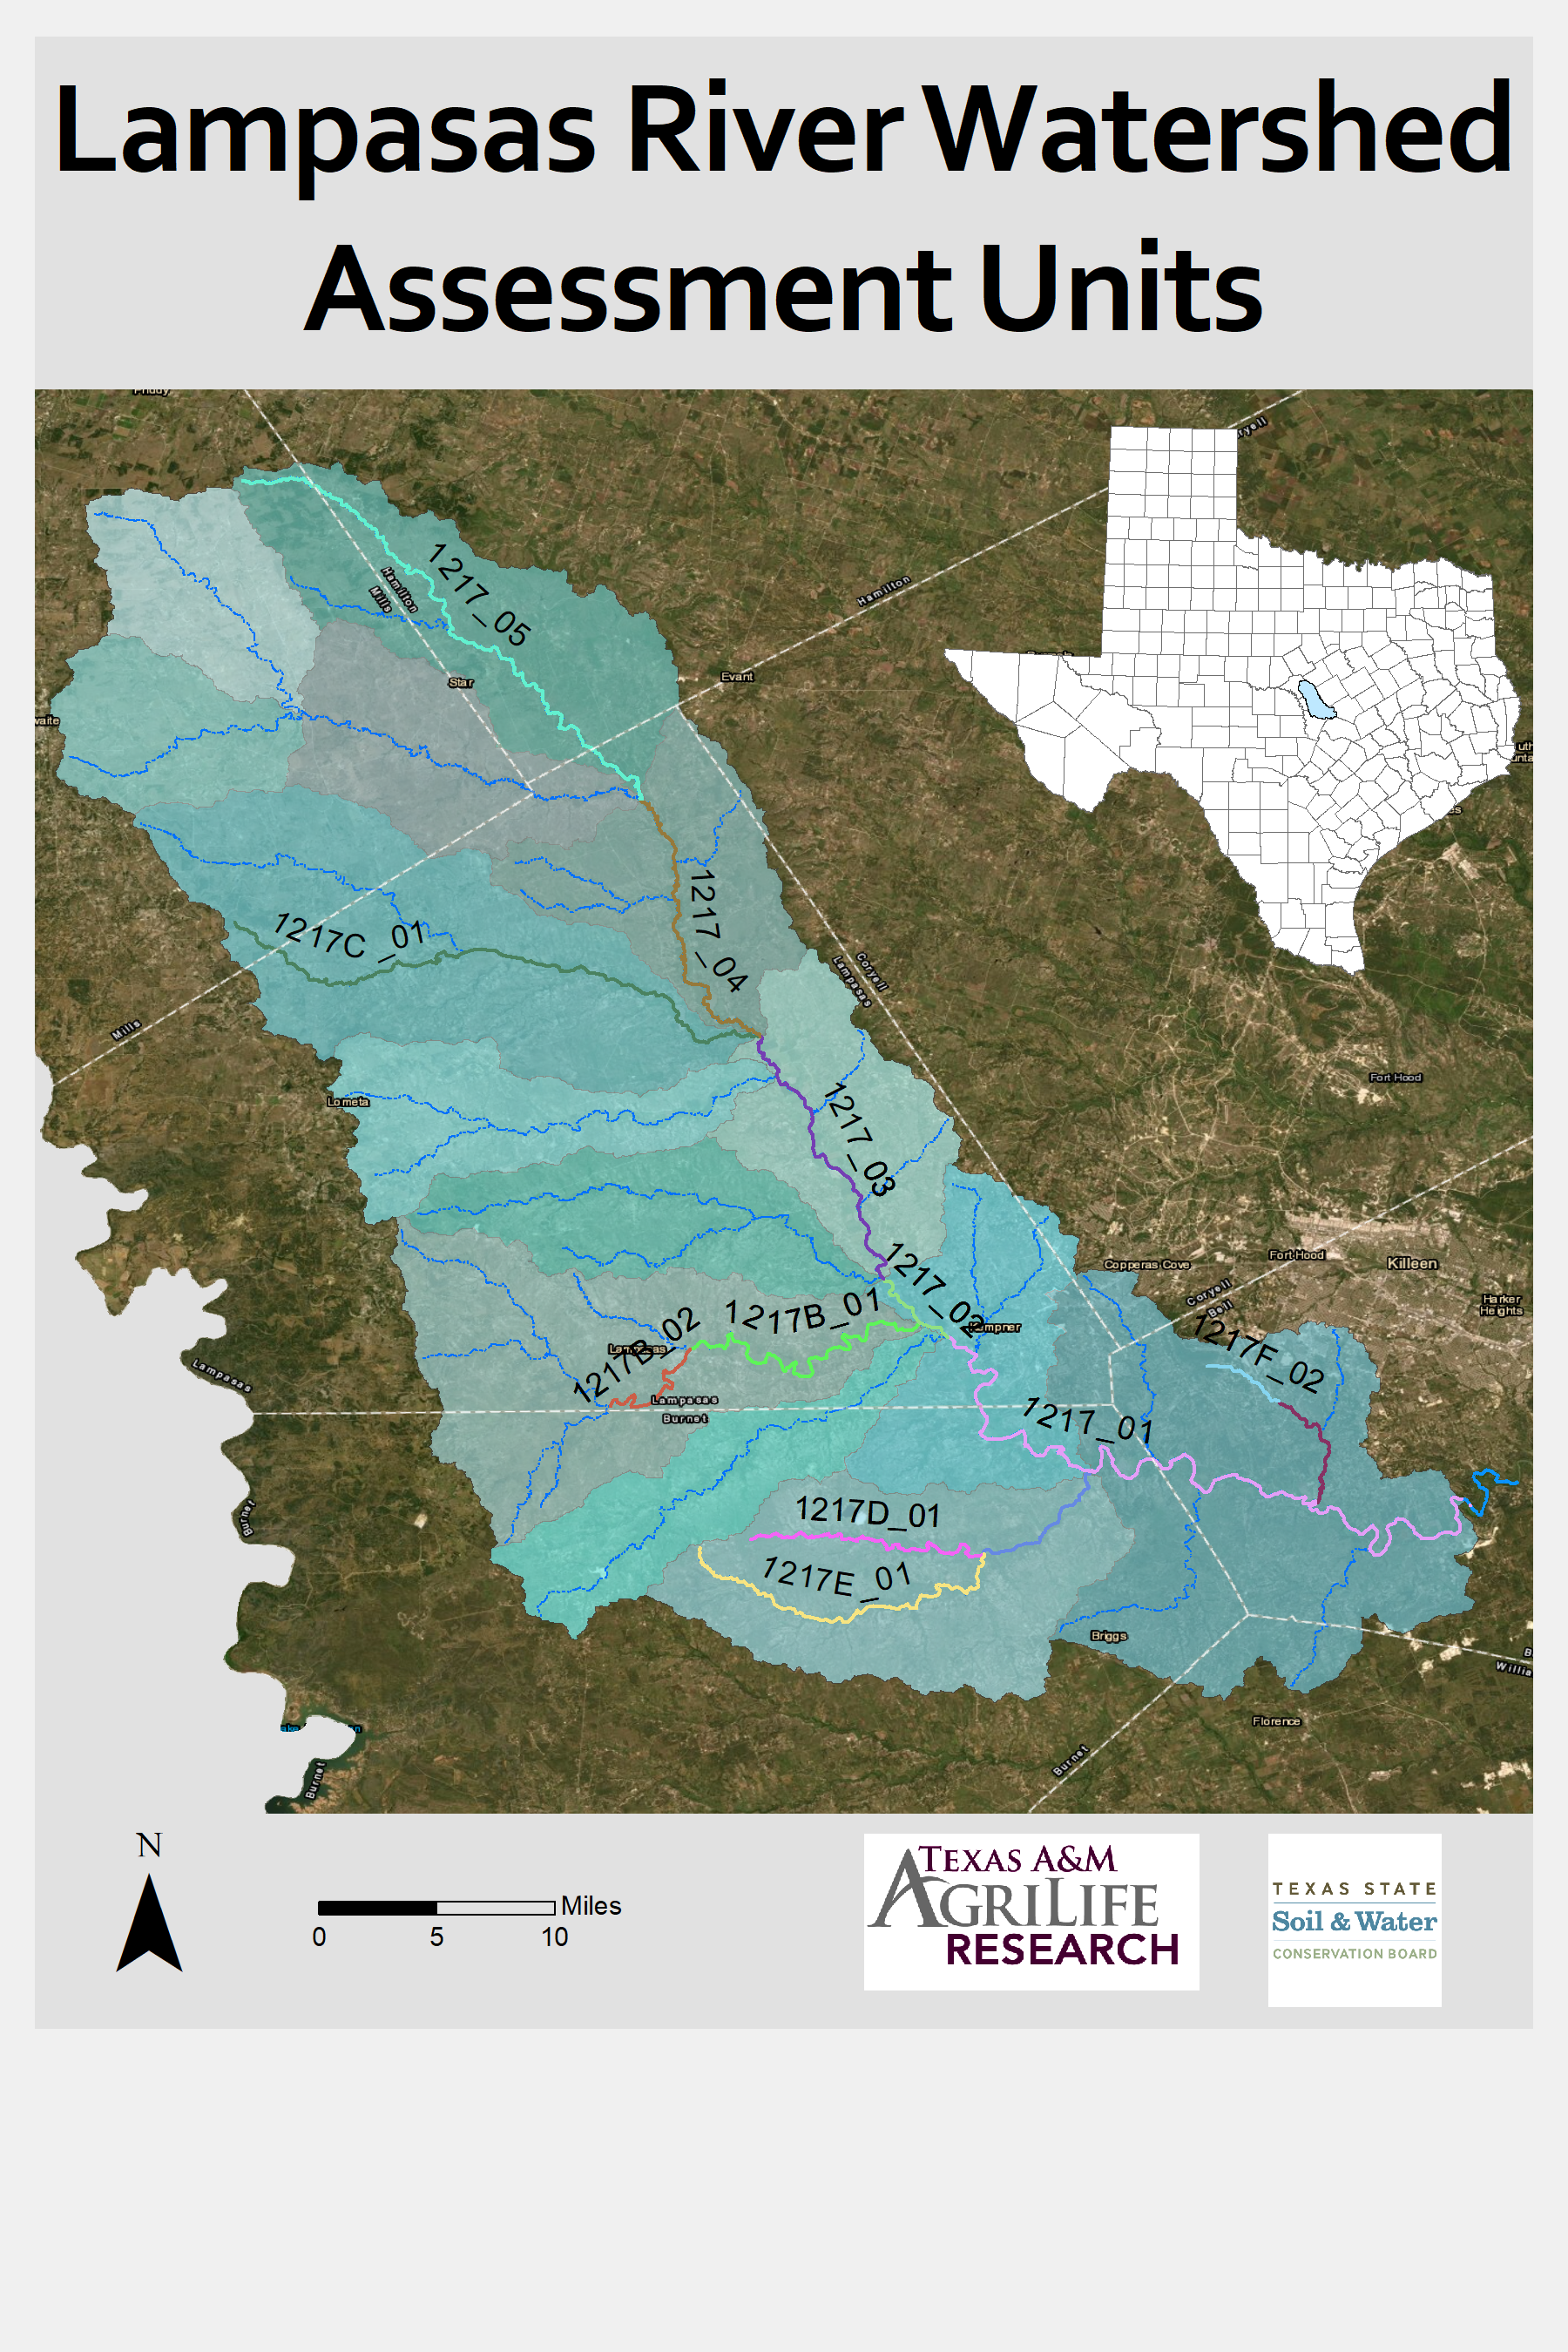 Lampasas Watershed Overview Assessment Units